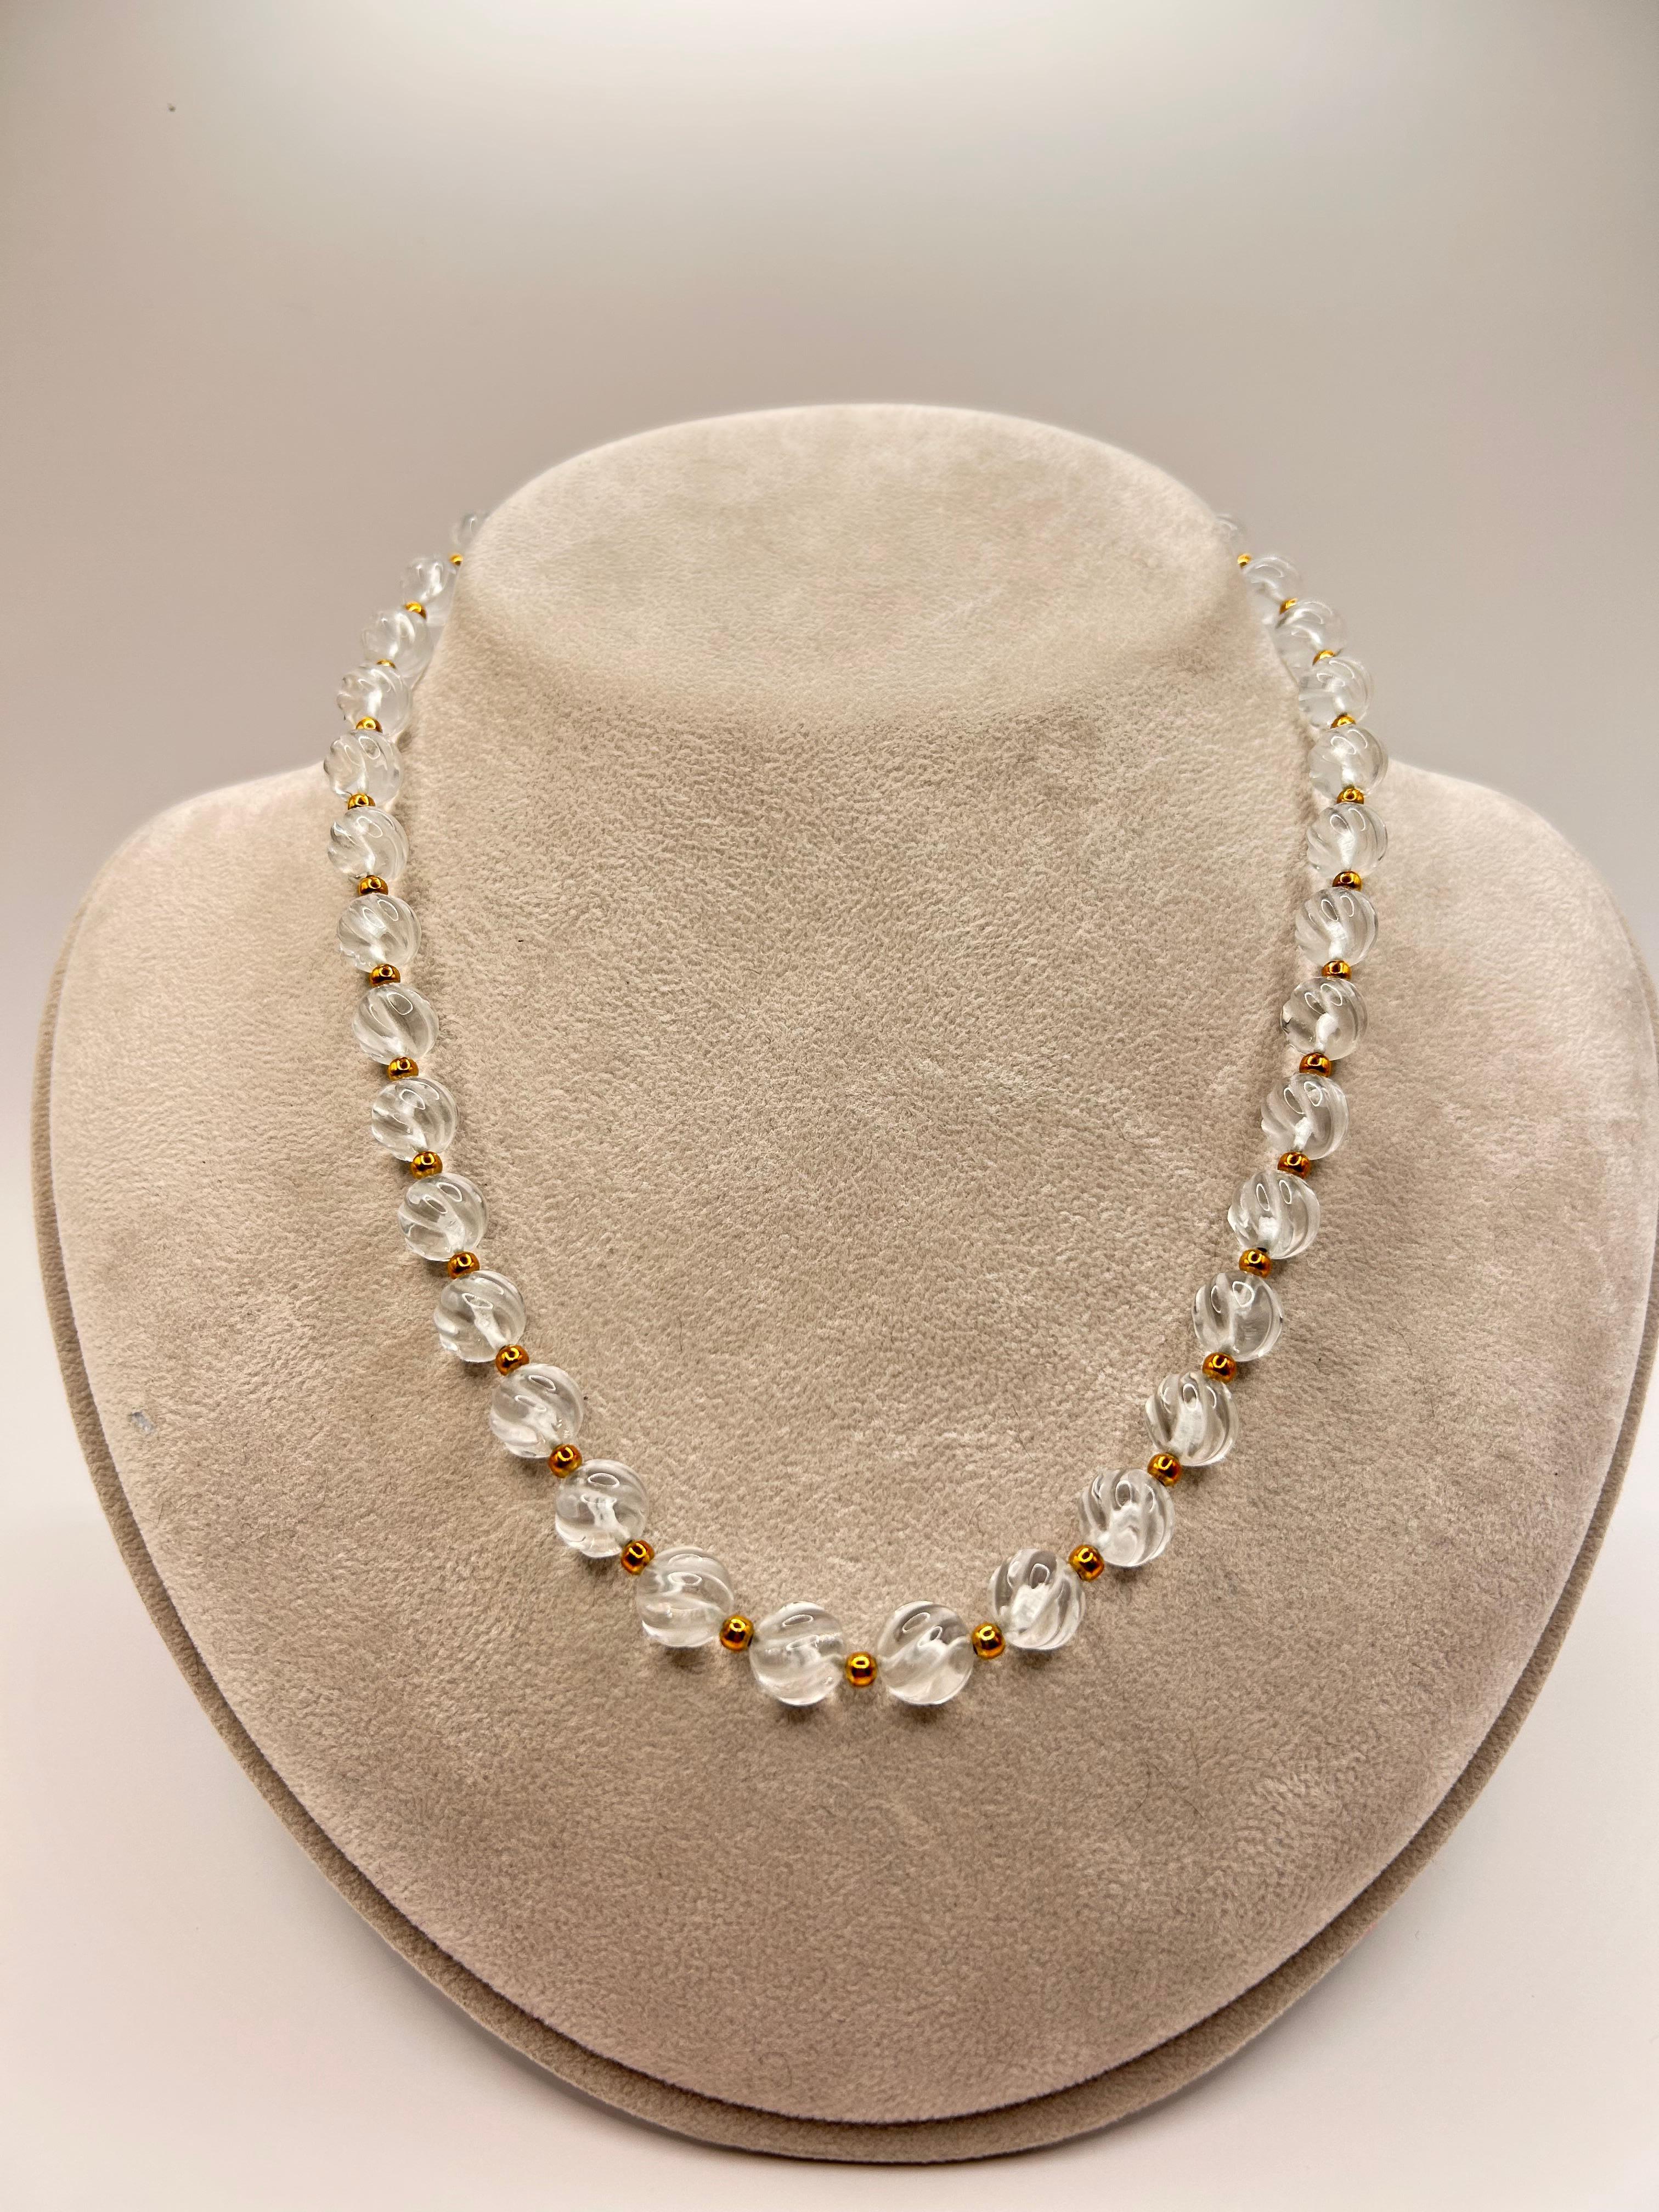 Boucheron Rock Crystal Necklace 18 karat yellow gold In Good Condition For Sale In New York, NY